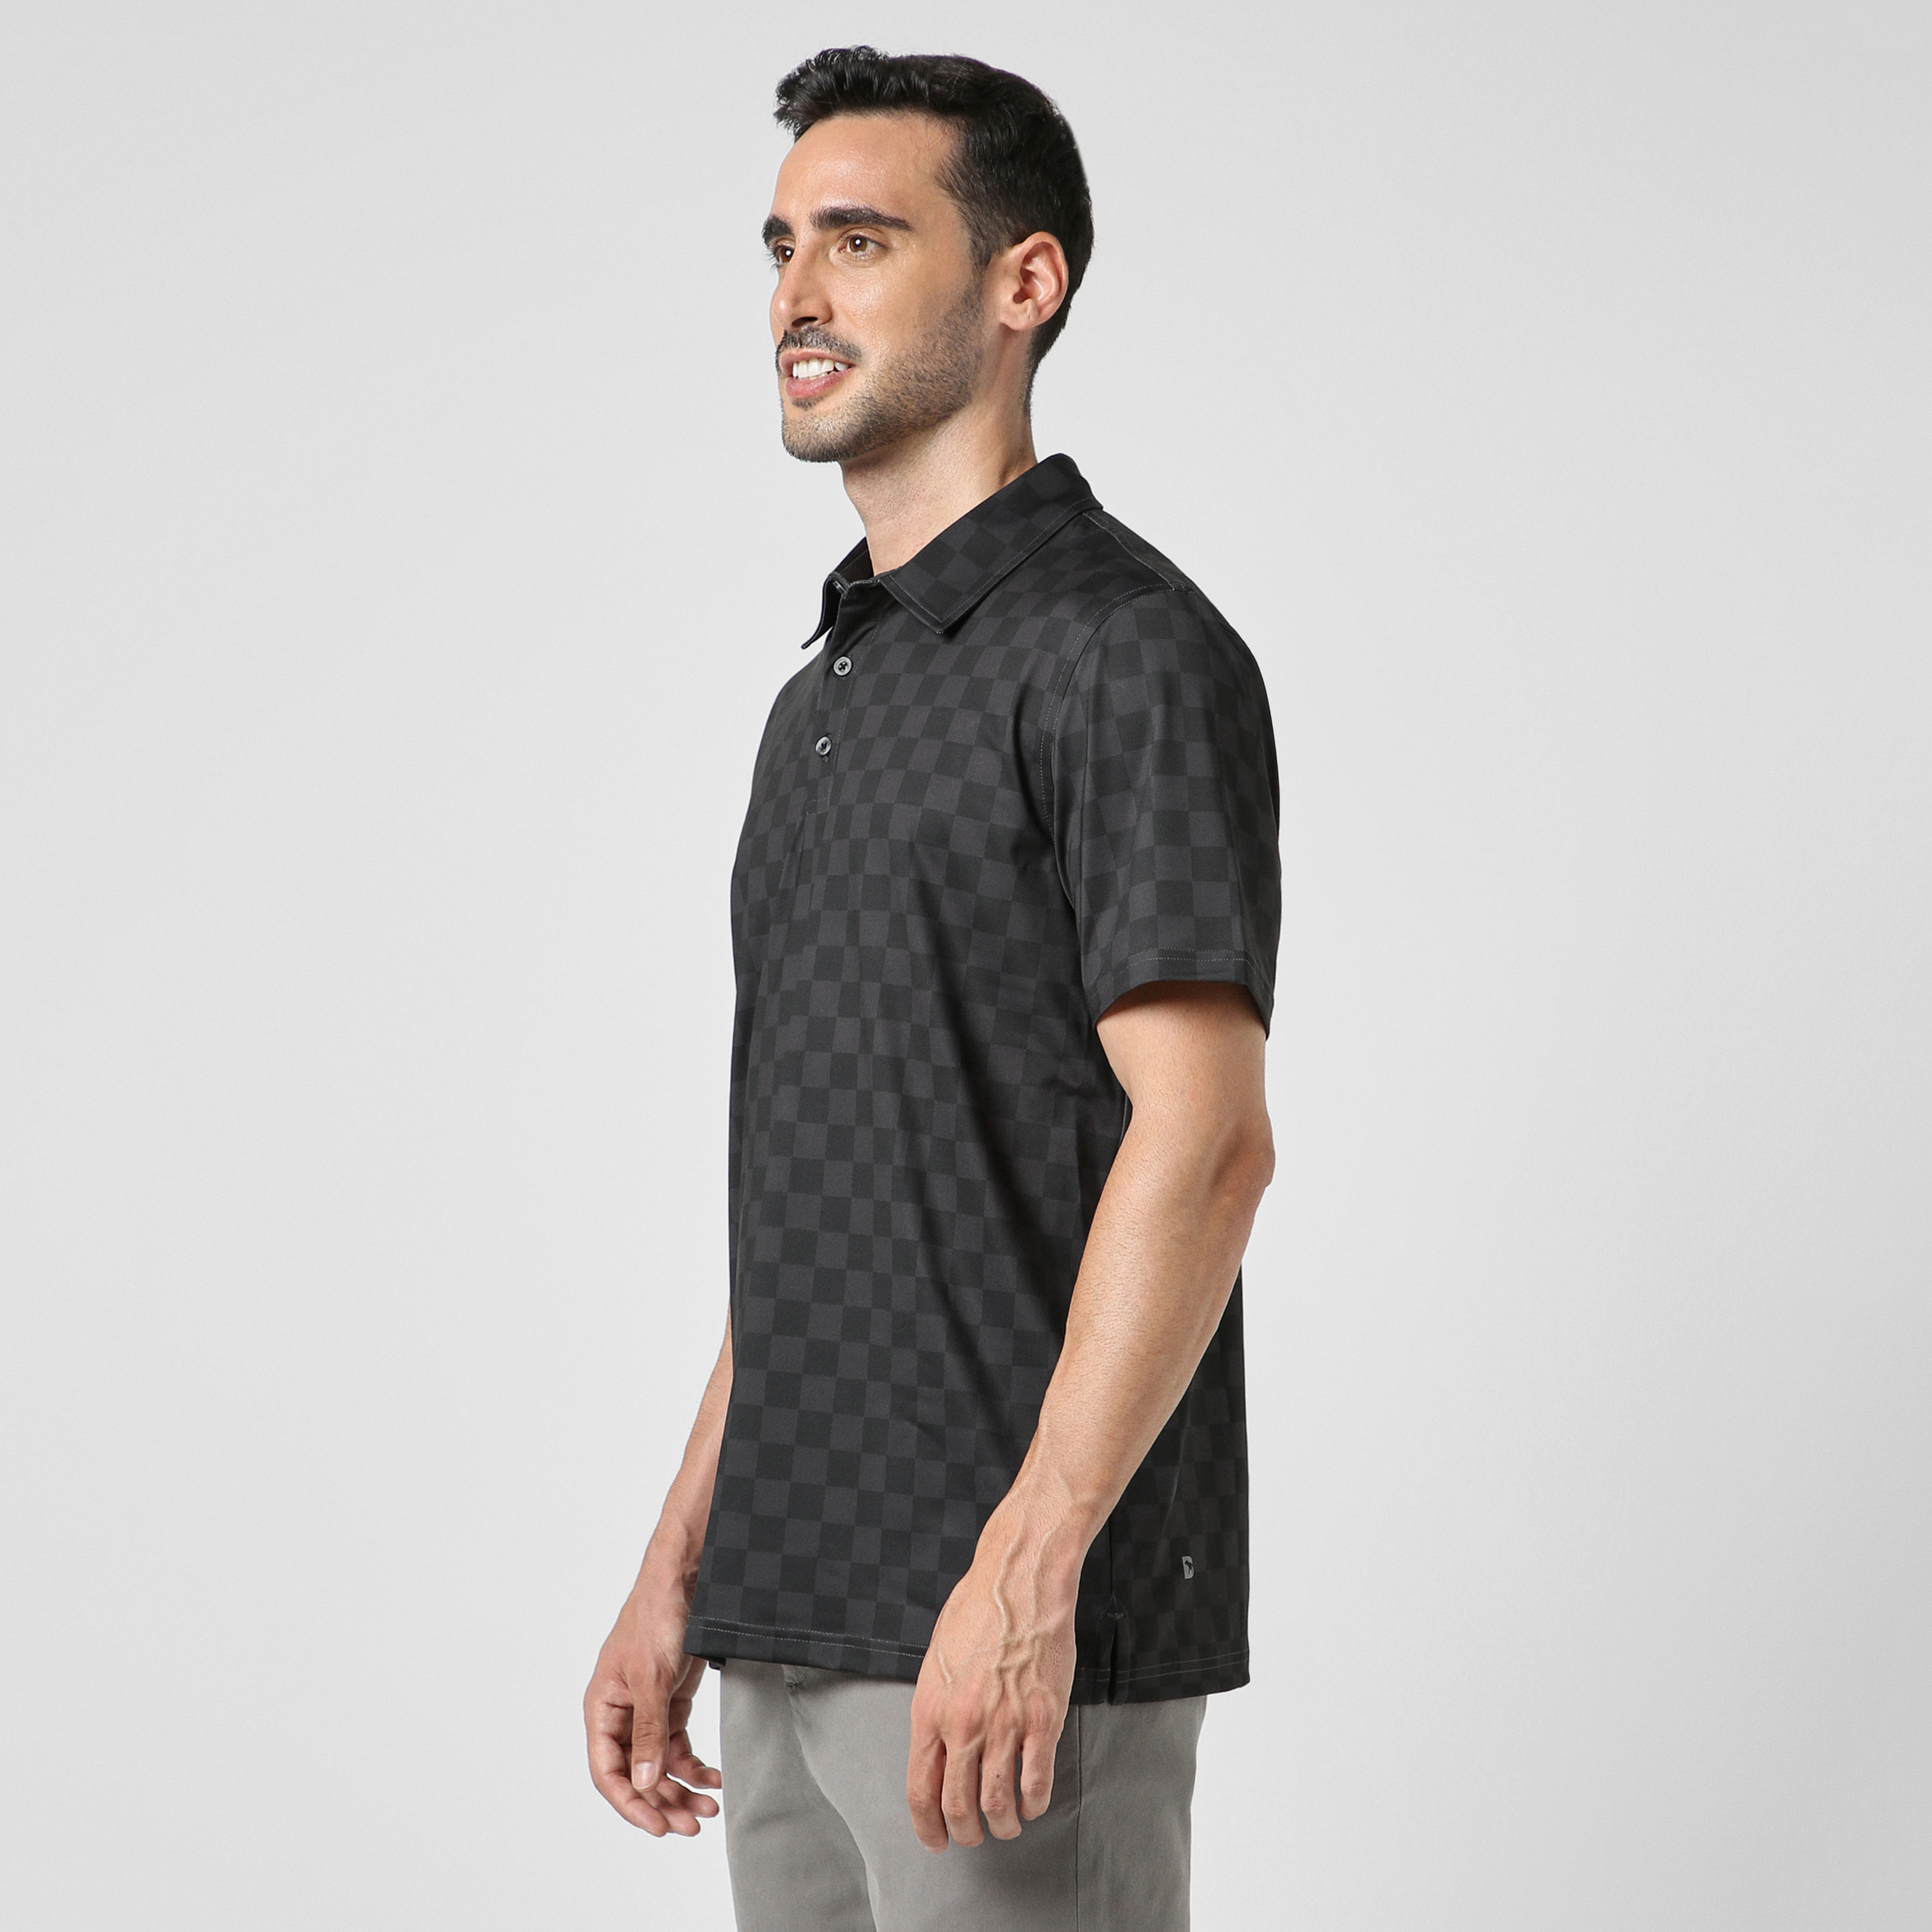 Performance Polo Black Checkers side on model